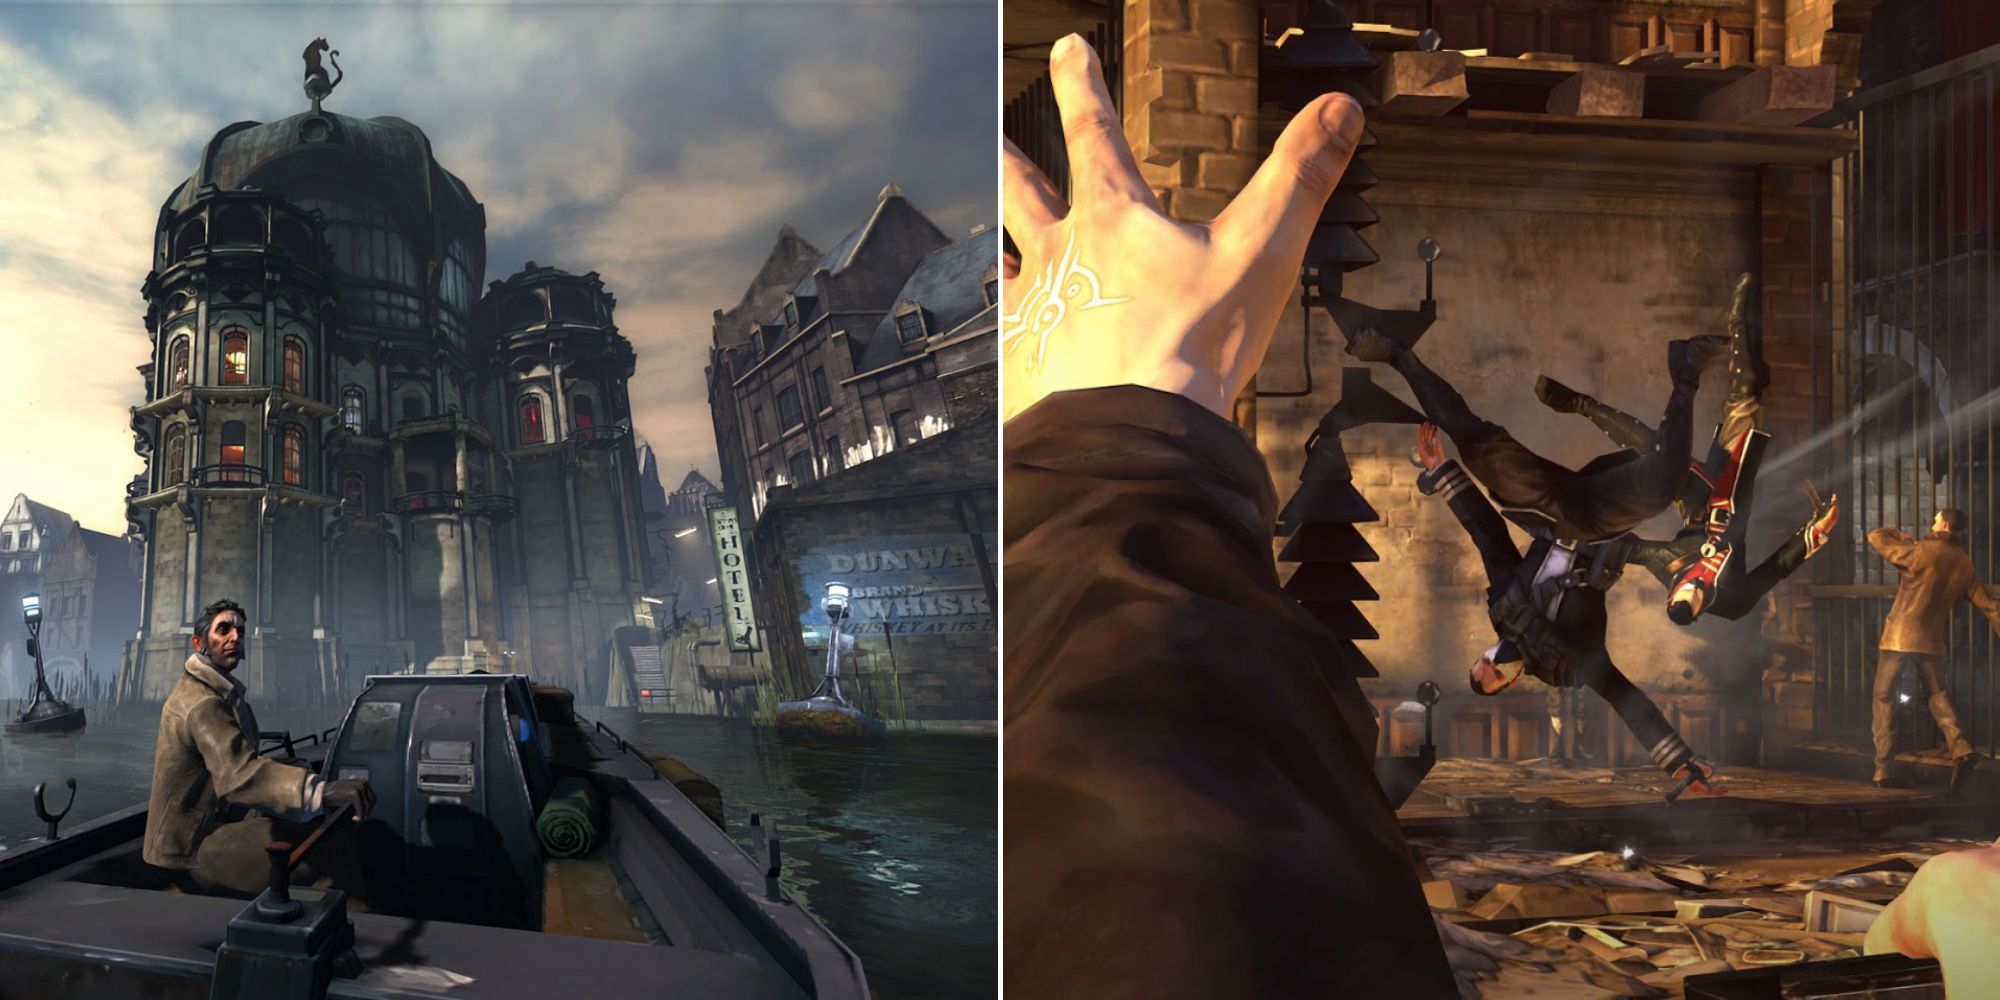 Dishonored - Arriving In Dunwall By Boat and Dishonored 2 - Using Magic To Trip Enemies